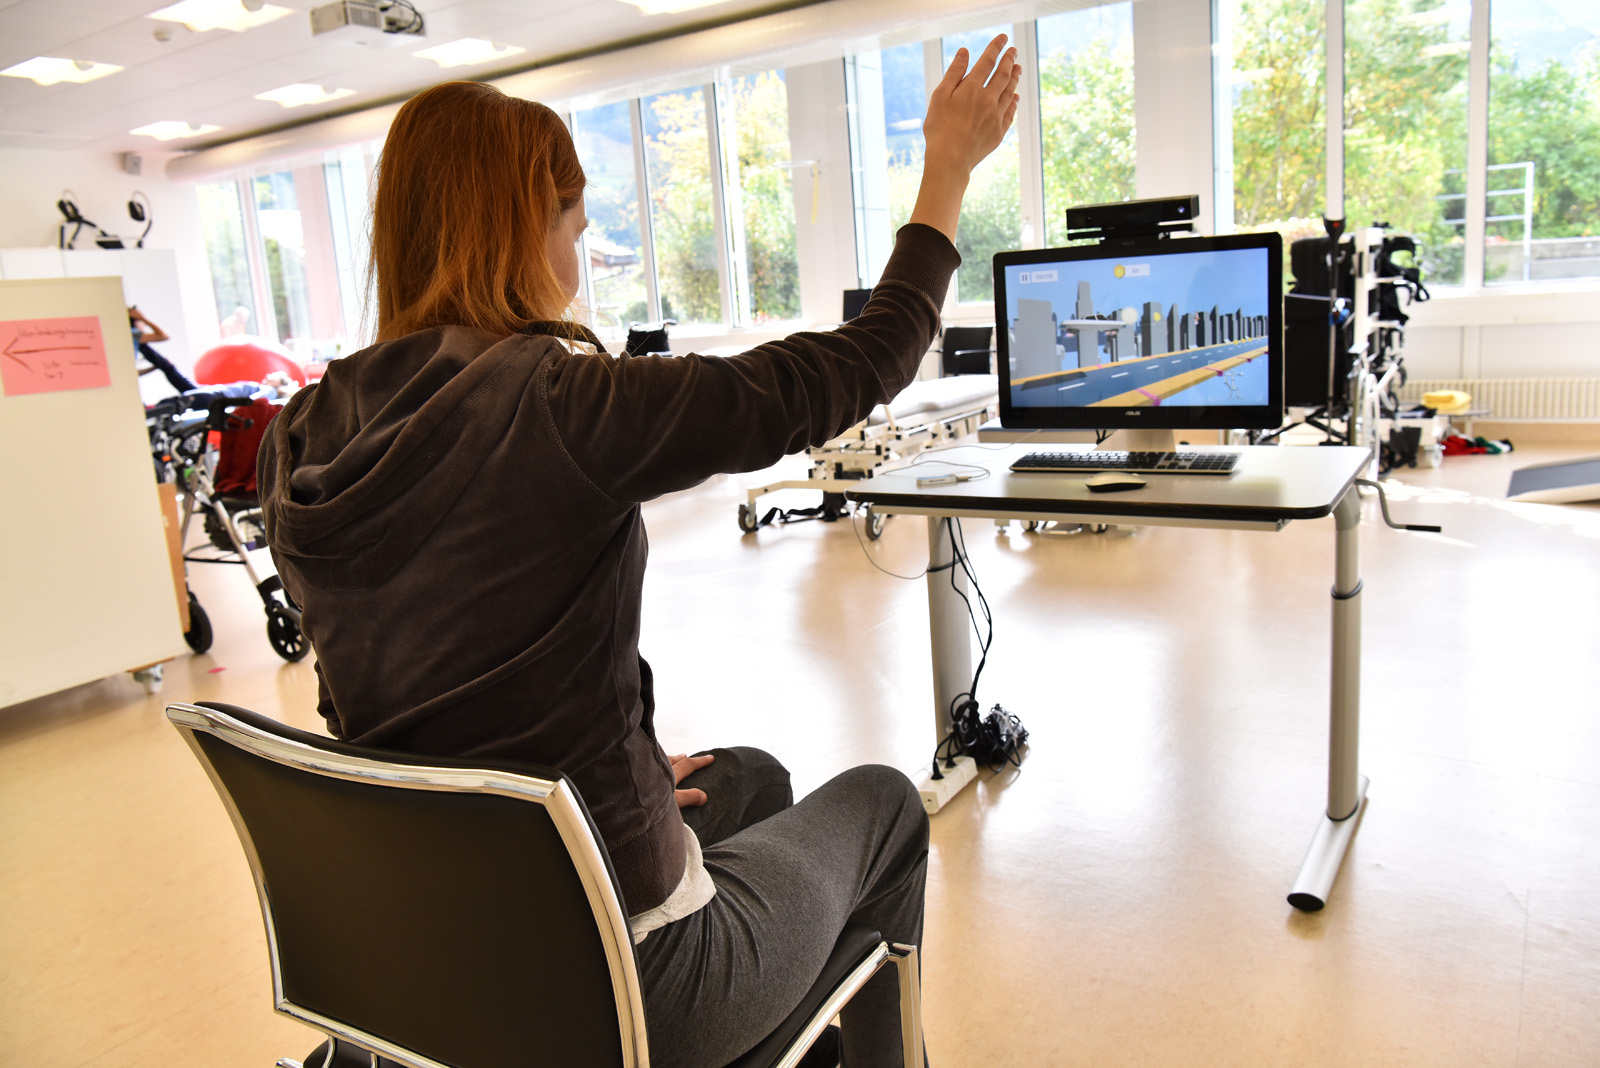 A woman sat in a chair lifting her arm in front of a screen to operate MindMotion GO